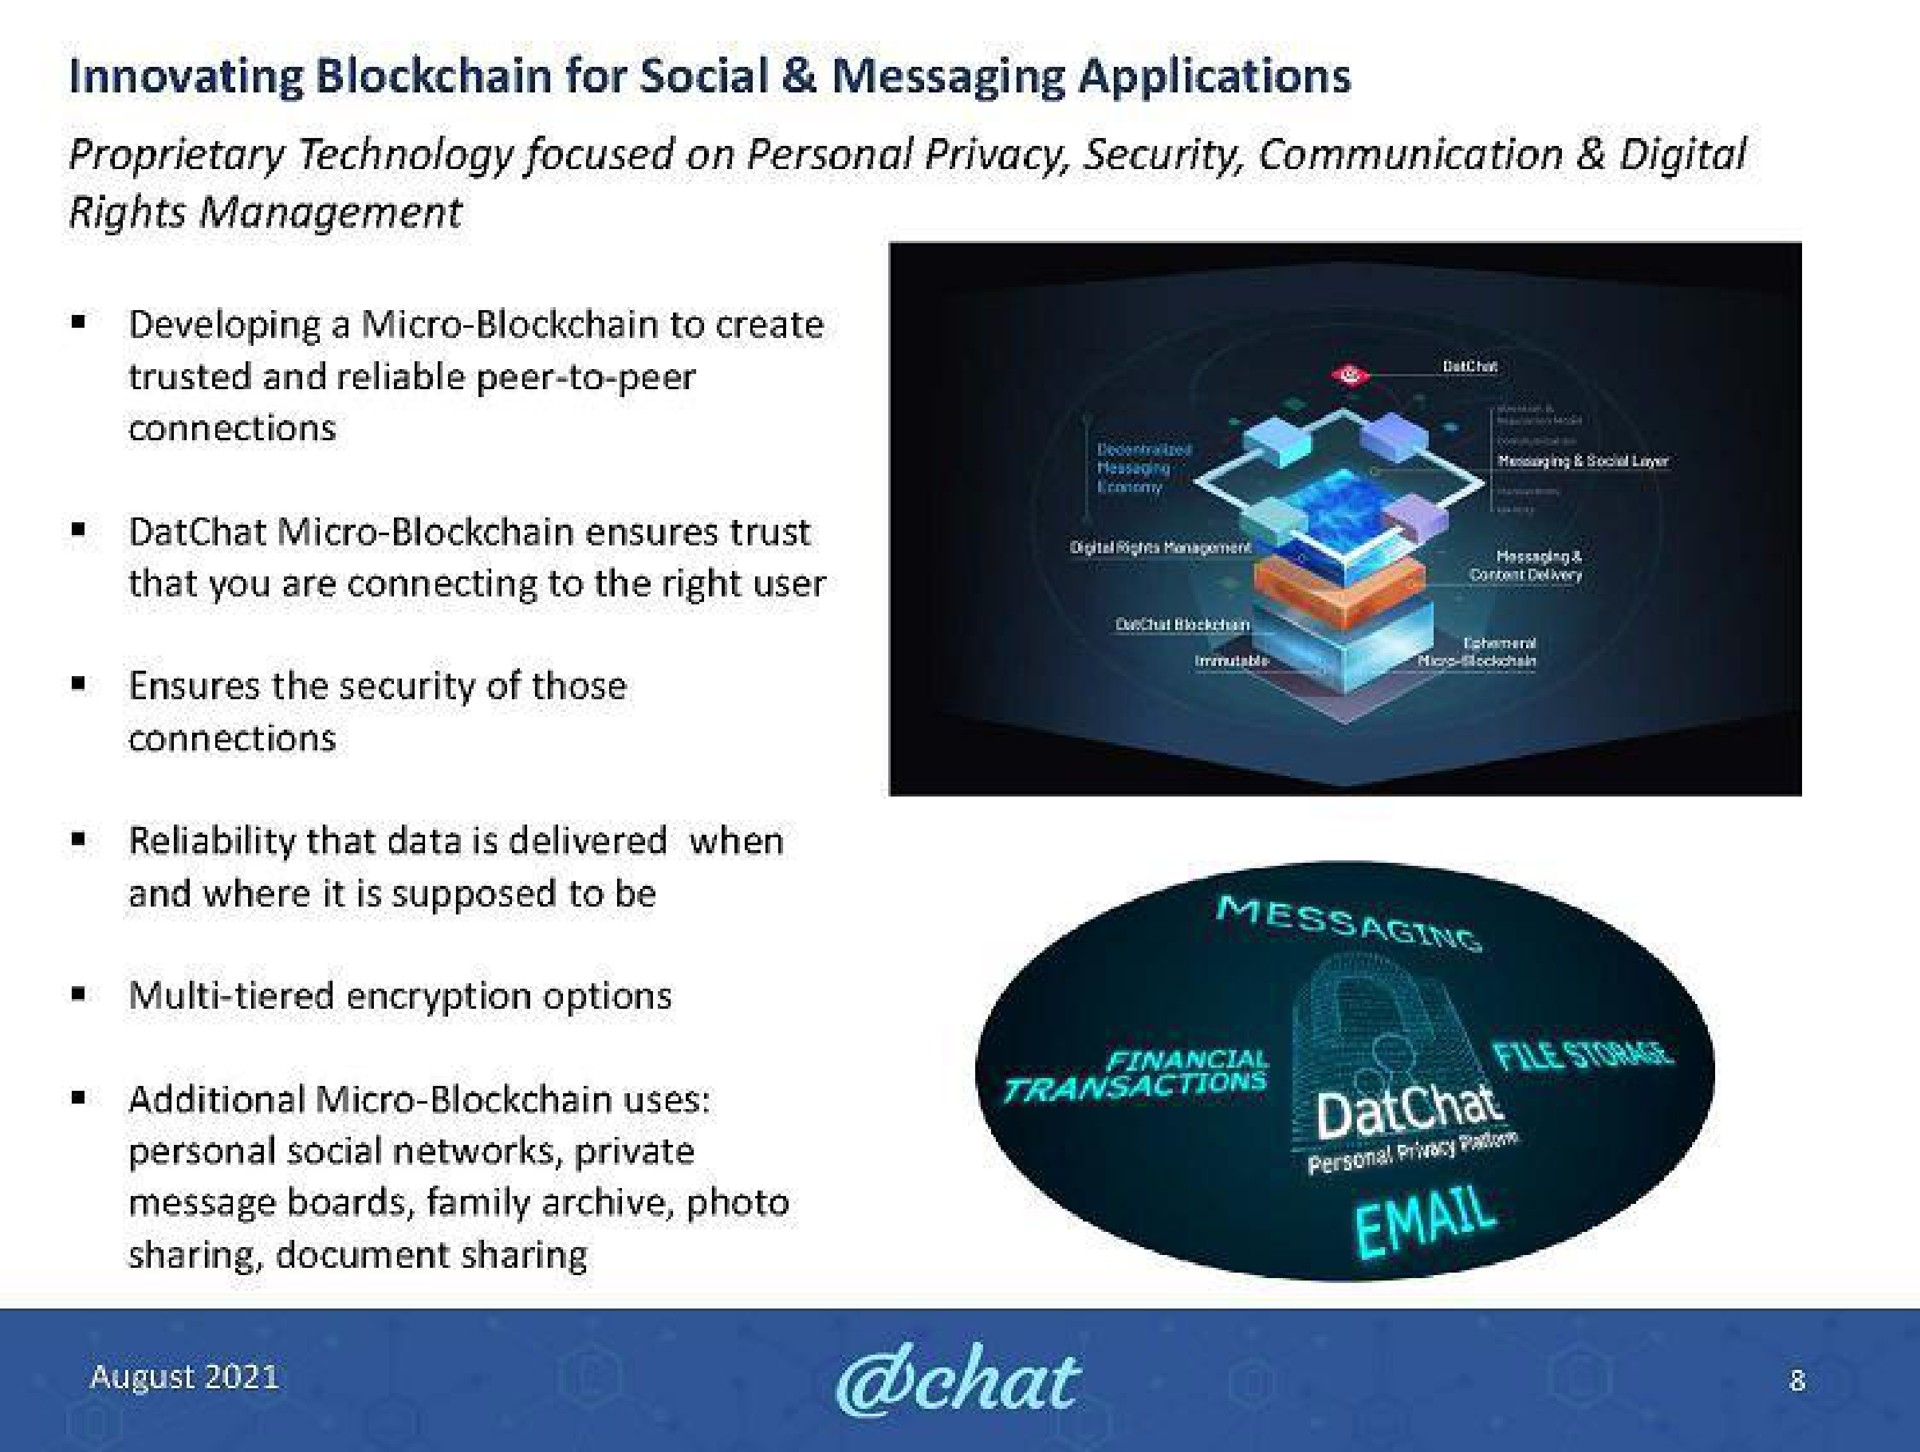 innovating for social messaging applications proprietary technology focused on personal privacy security communication digital rights management | DatChat